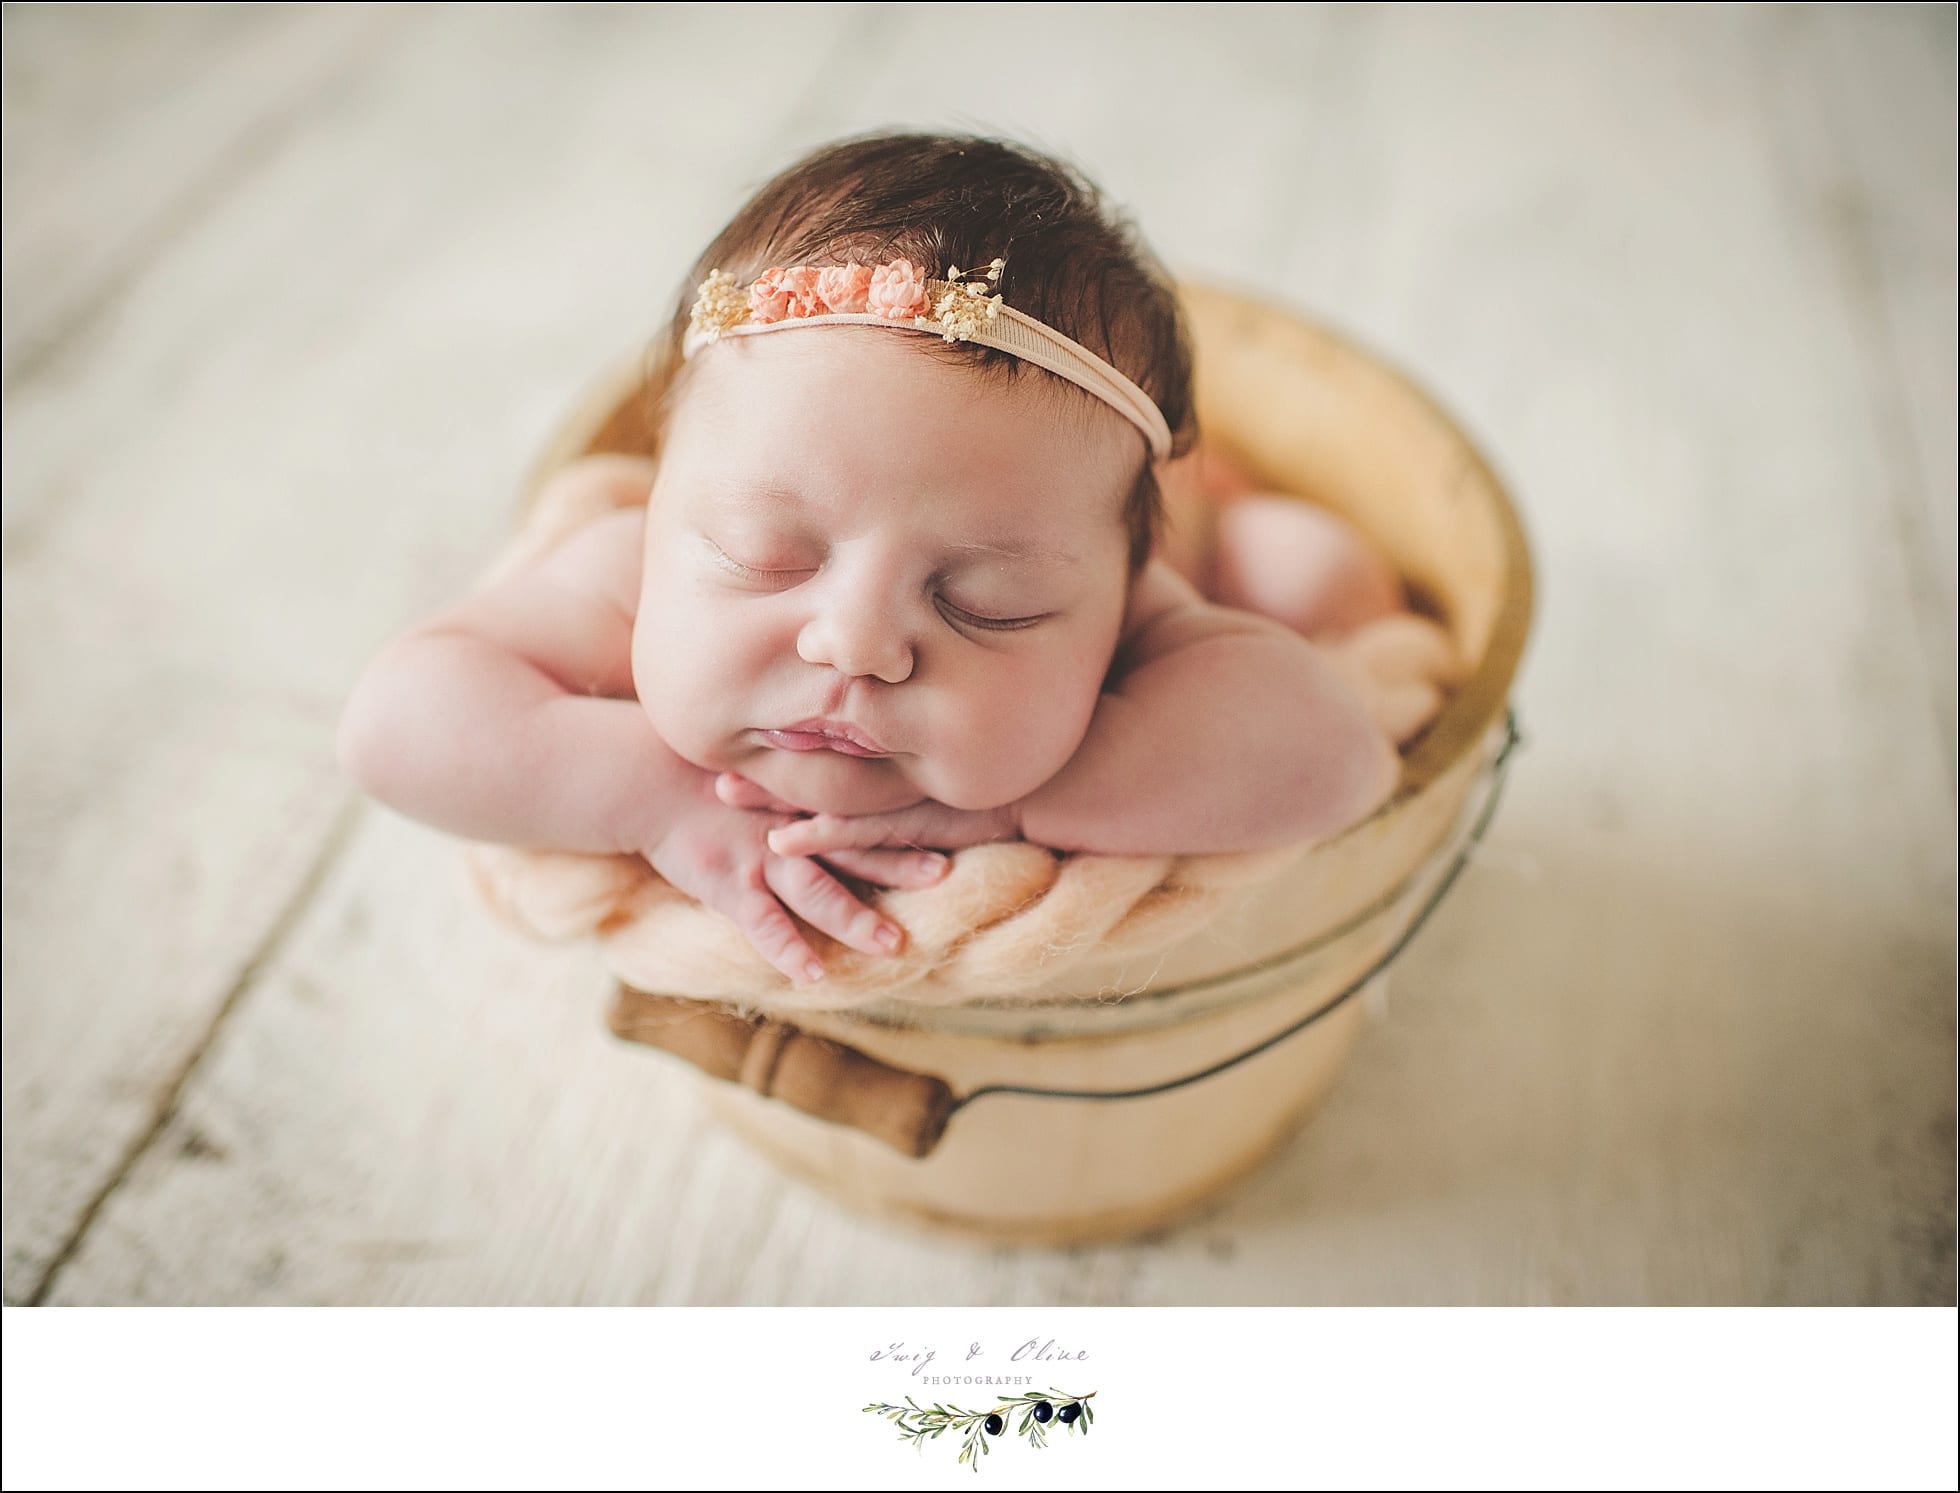 hair flowers, buckets, blankets, swaddled, cherubs, miracles, life, love, happy babies, Twig and Olive photography newborns